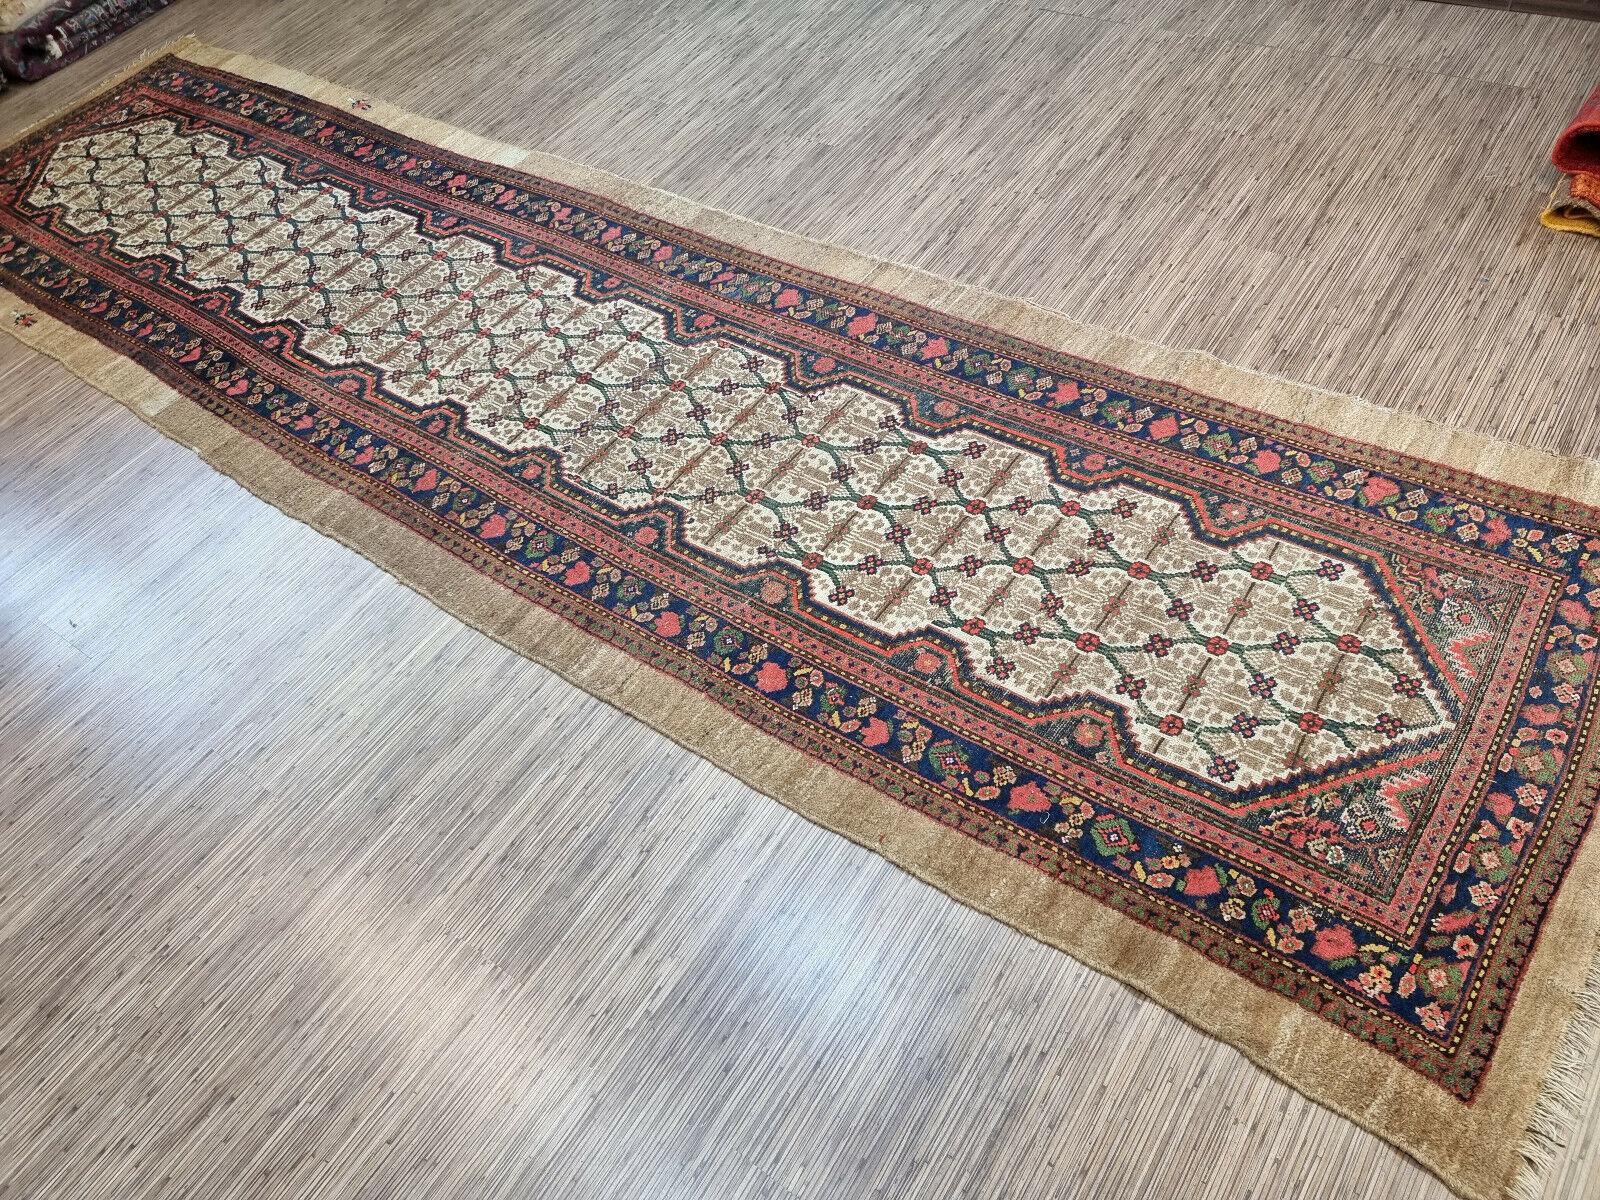 Add a touch of history and artistry to your space with this Handmade Antique Persian Style Camel Hair Runner Rug. This stunning piece measures 4’ x 14.4’ and dates back to the 1900s, making it a rare and valuable find. It is in good condition and